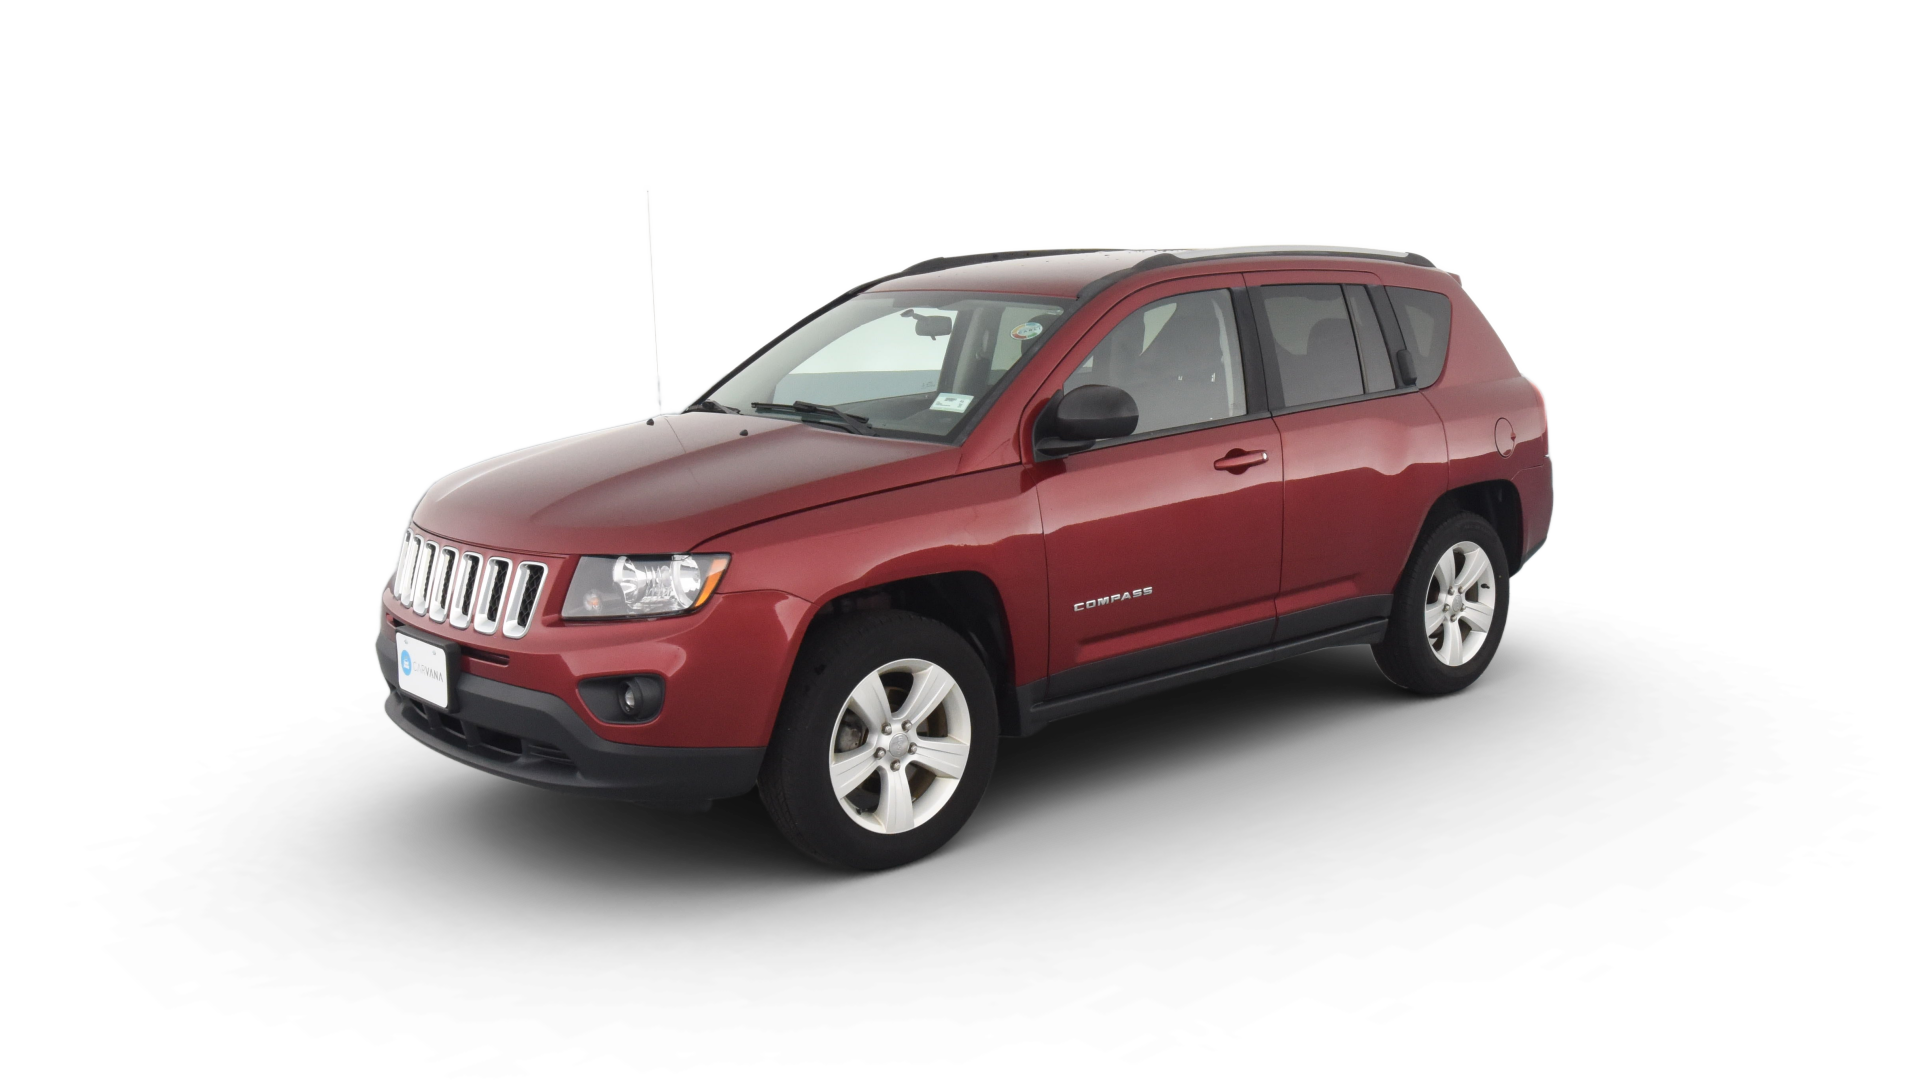 Used 2015 Jeep Compass For Sale Online | Carvana